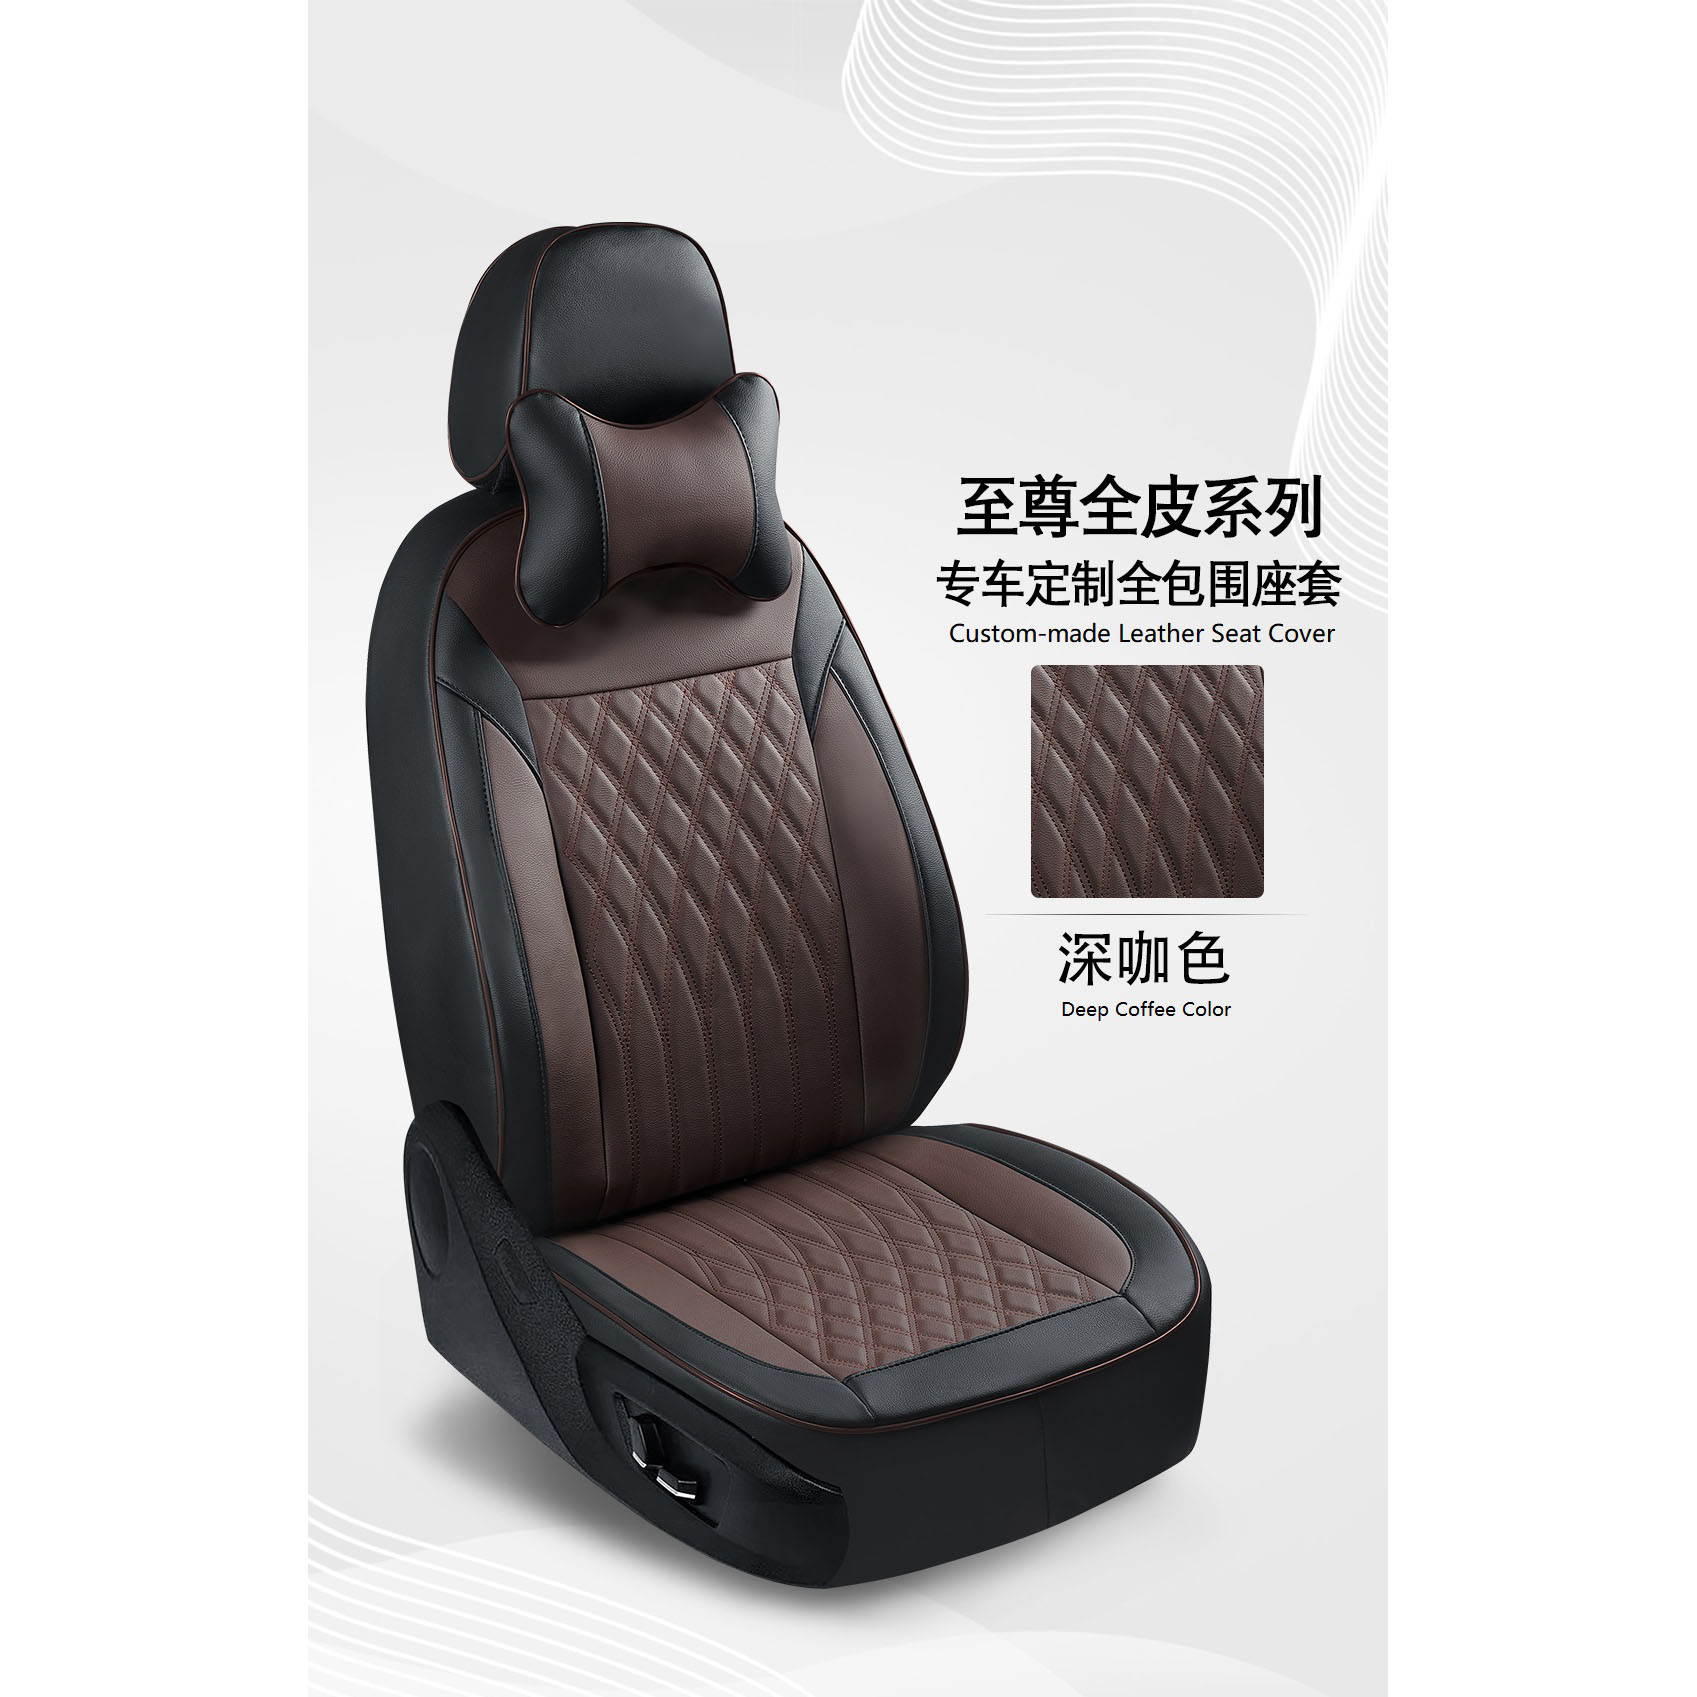 Wholesale Dealers of 2014 Toyota Camry Seat Covers - China Factory Direct Supply of Custom Seat Covers for Auto – Bensen